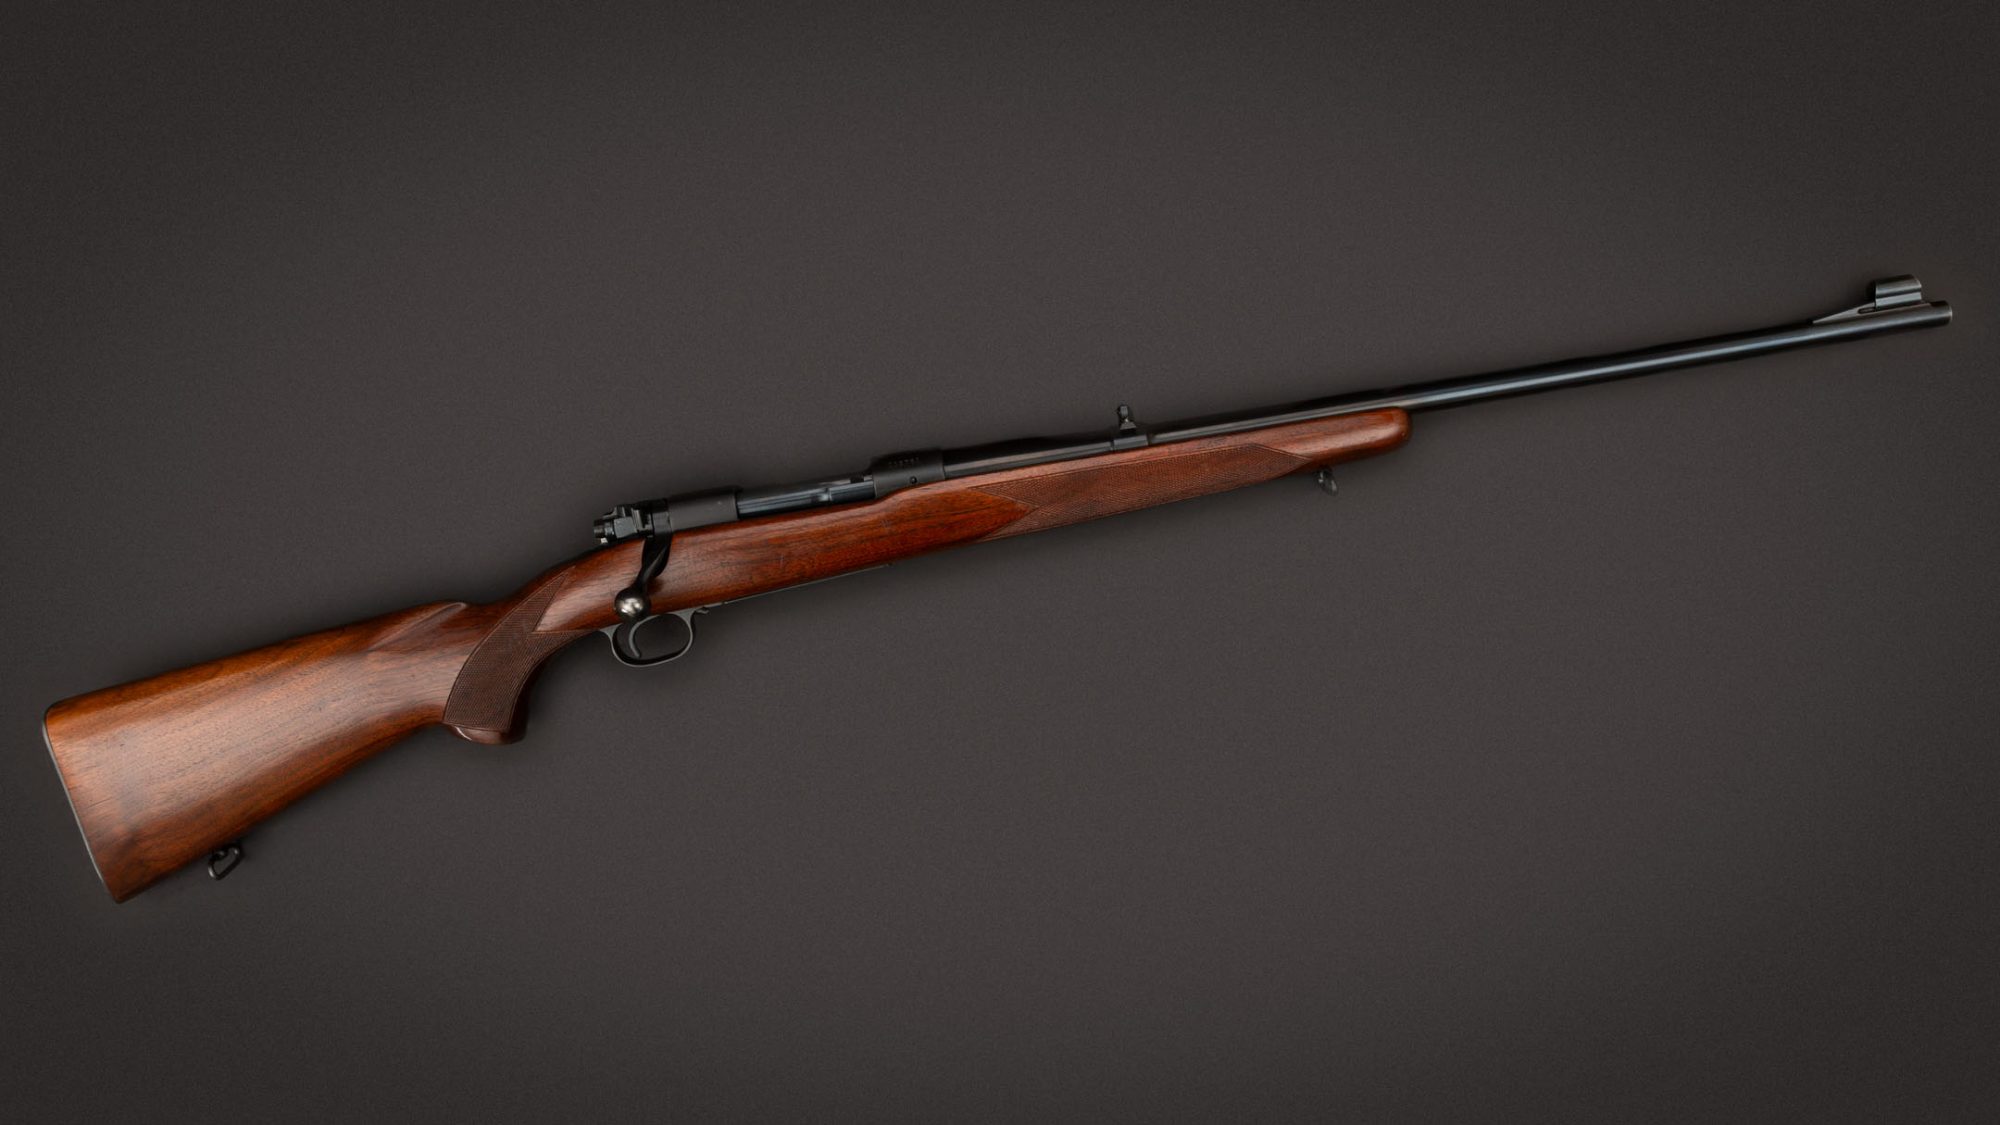 Winchester Model 70 in .30-06 Springfield from 1949, for sale by Turnbull Restoration Co. of Bloomfield, NY